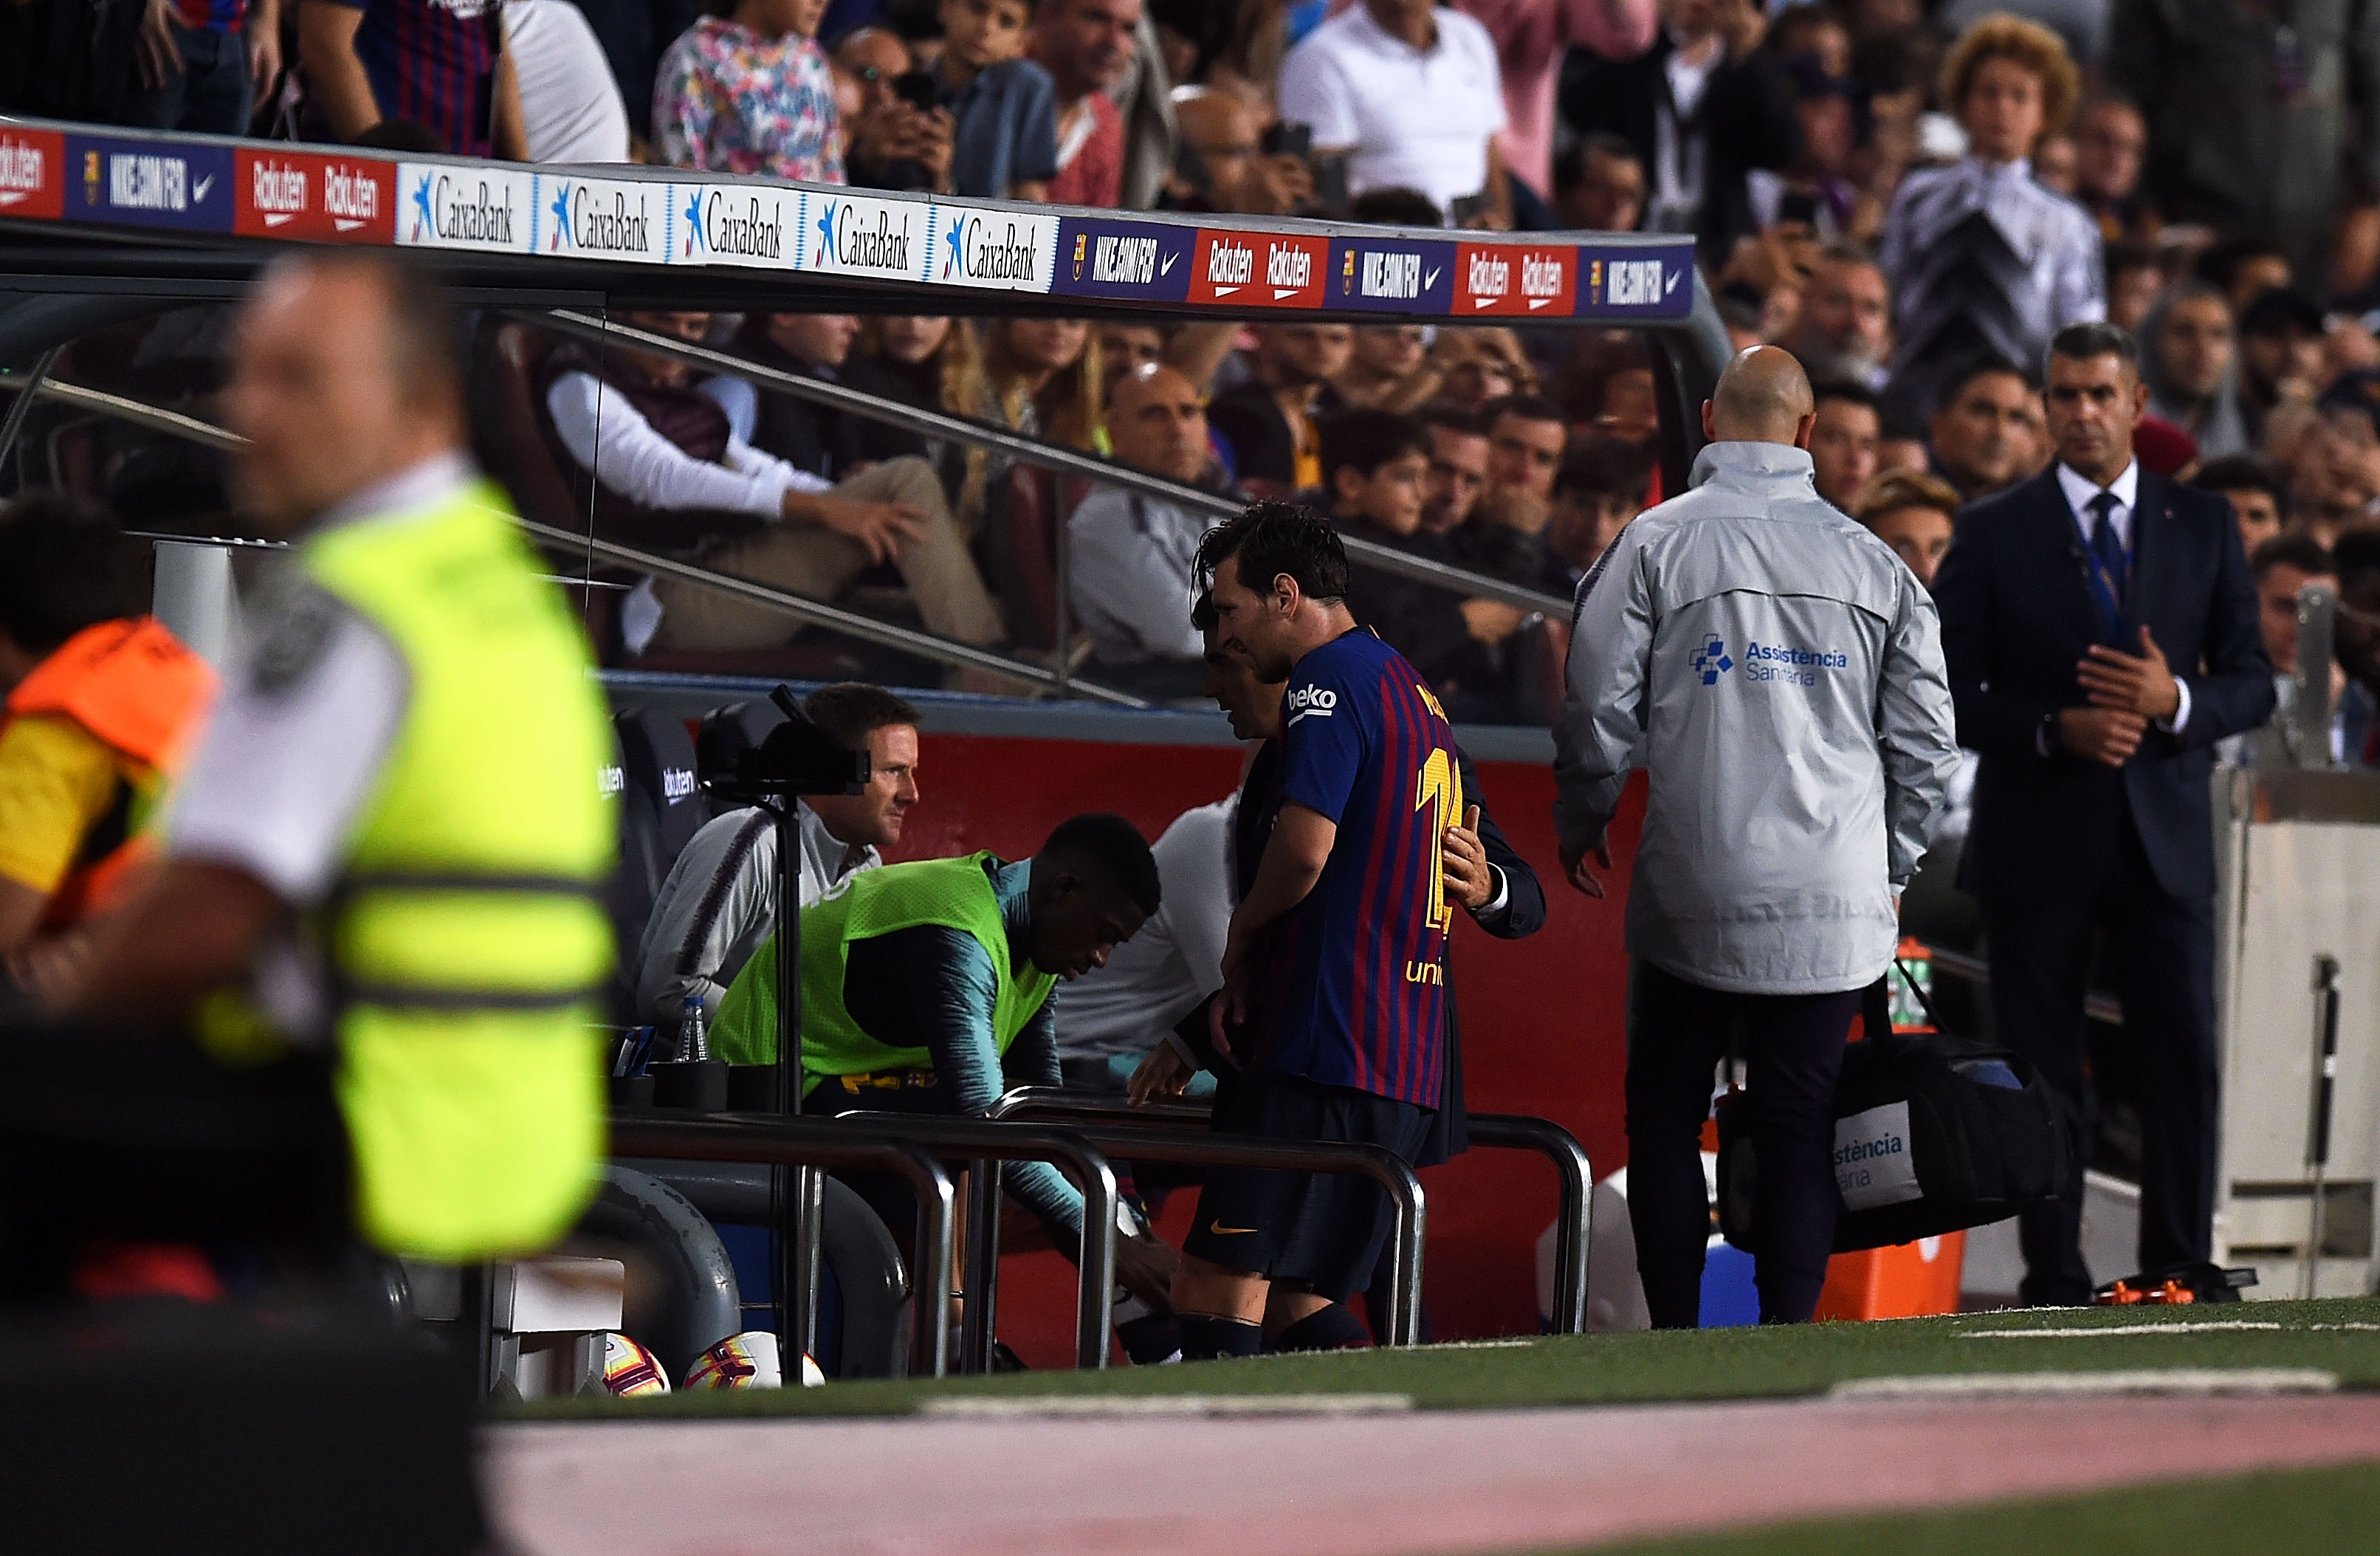 BARCELONA, SPAIN - OCTOBER 20: Lionel Messi of FC Barcelona(C) is substituted through injury and heads down the tunnel during the La Liga match between FC Barcelona and Sevilla FC at Camp Nou on October 20, 2018 in Barcelona, Spain. (Photo by Alex Caparros/Getty Images)